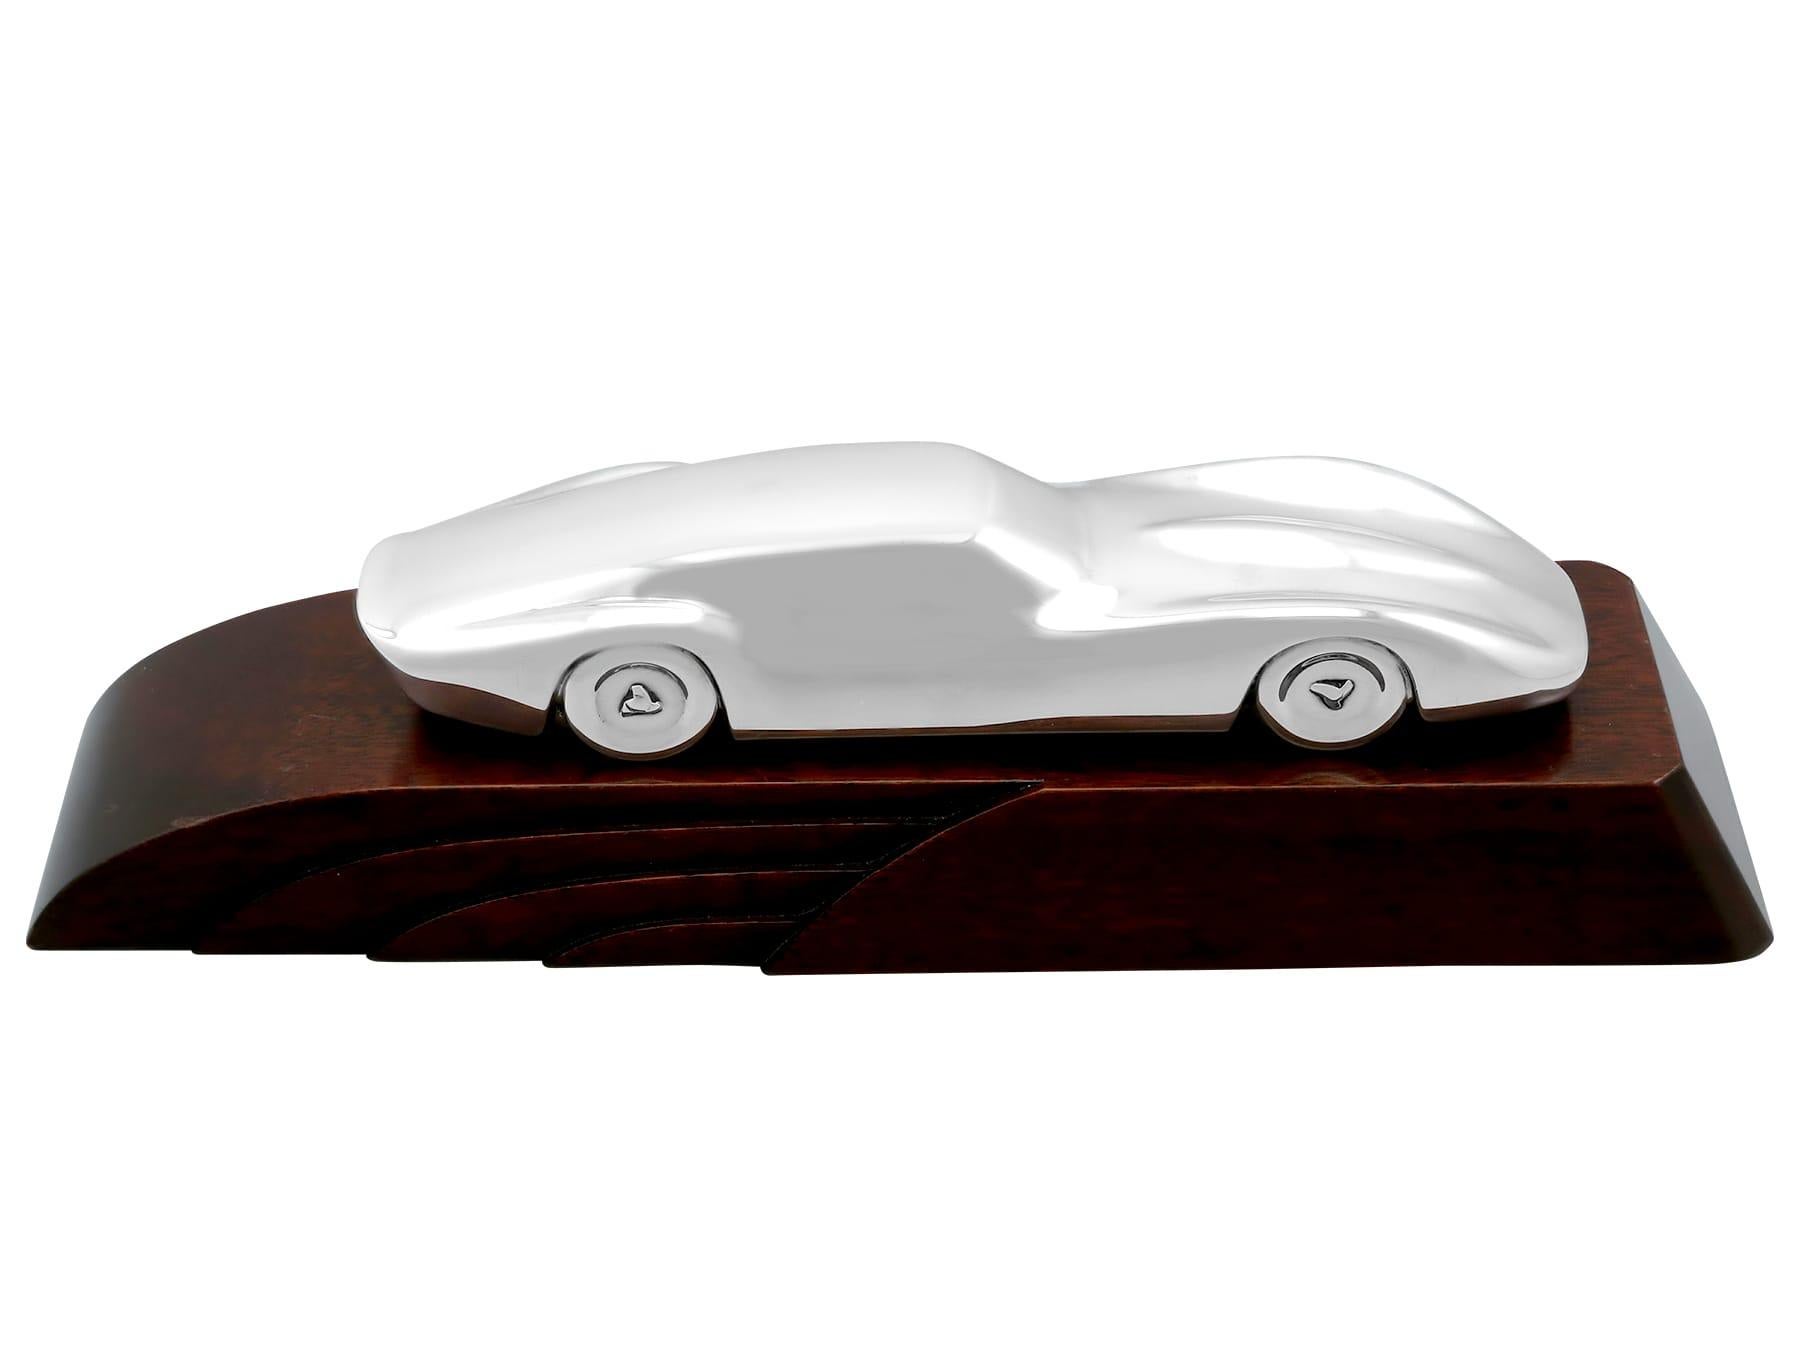 This exceptional and rare, vintage English sterling silver presentation ornament has been realistically modelled in the form of a car in the Art Nouveau manner.

The body of this stylised Jaguar style car has a plain moulded form.

This exceptional